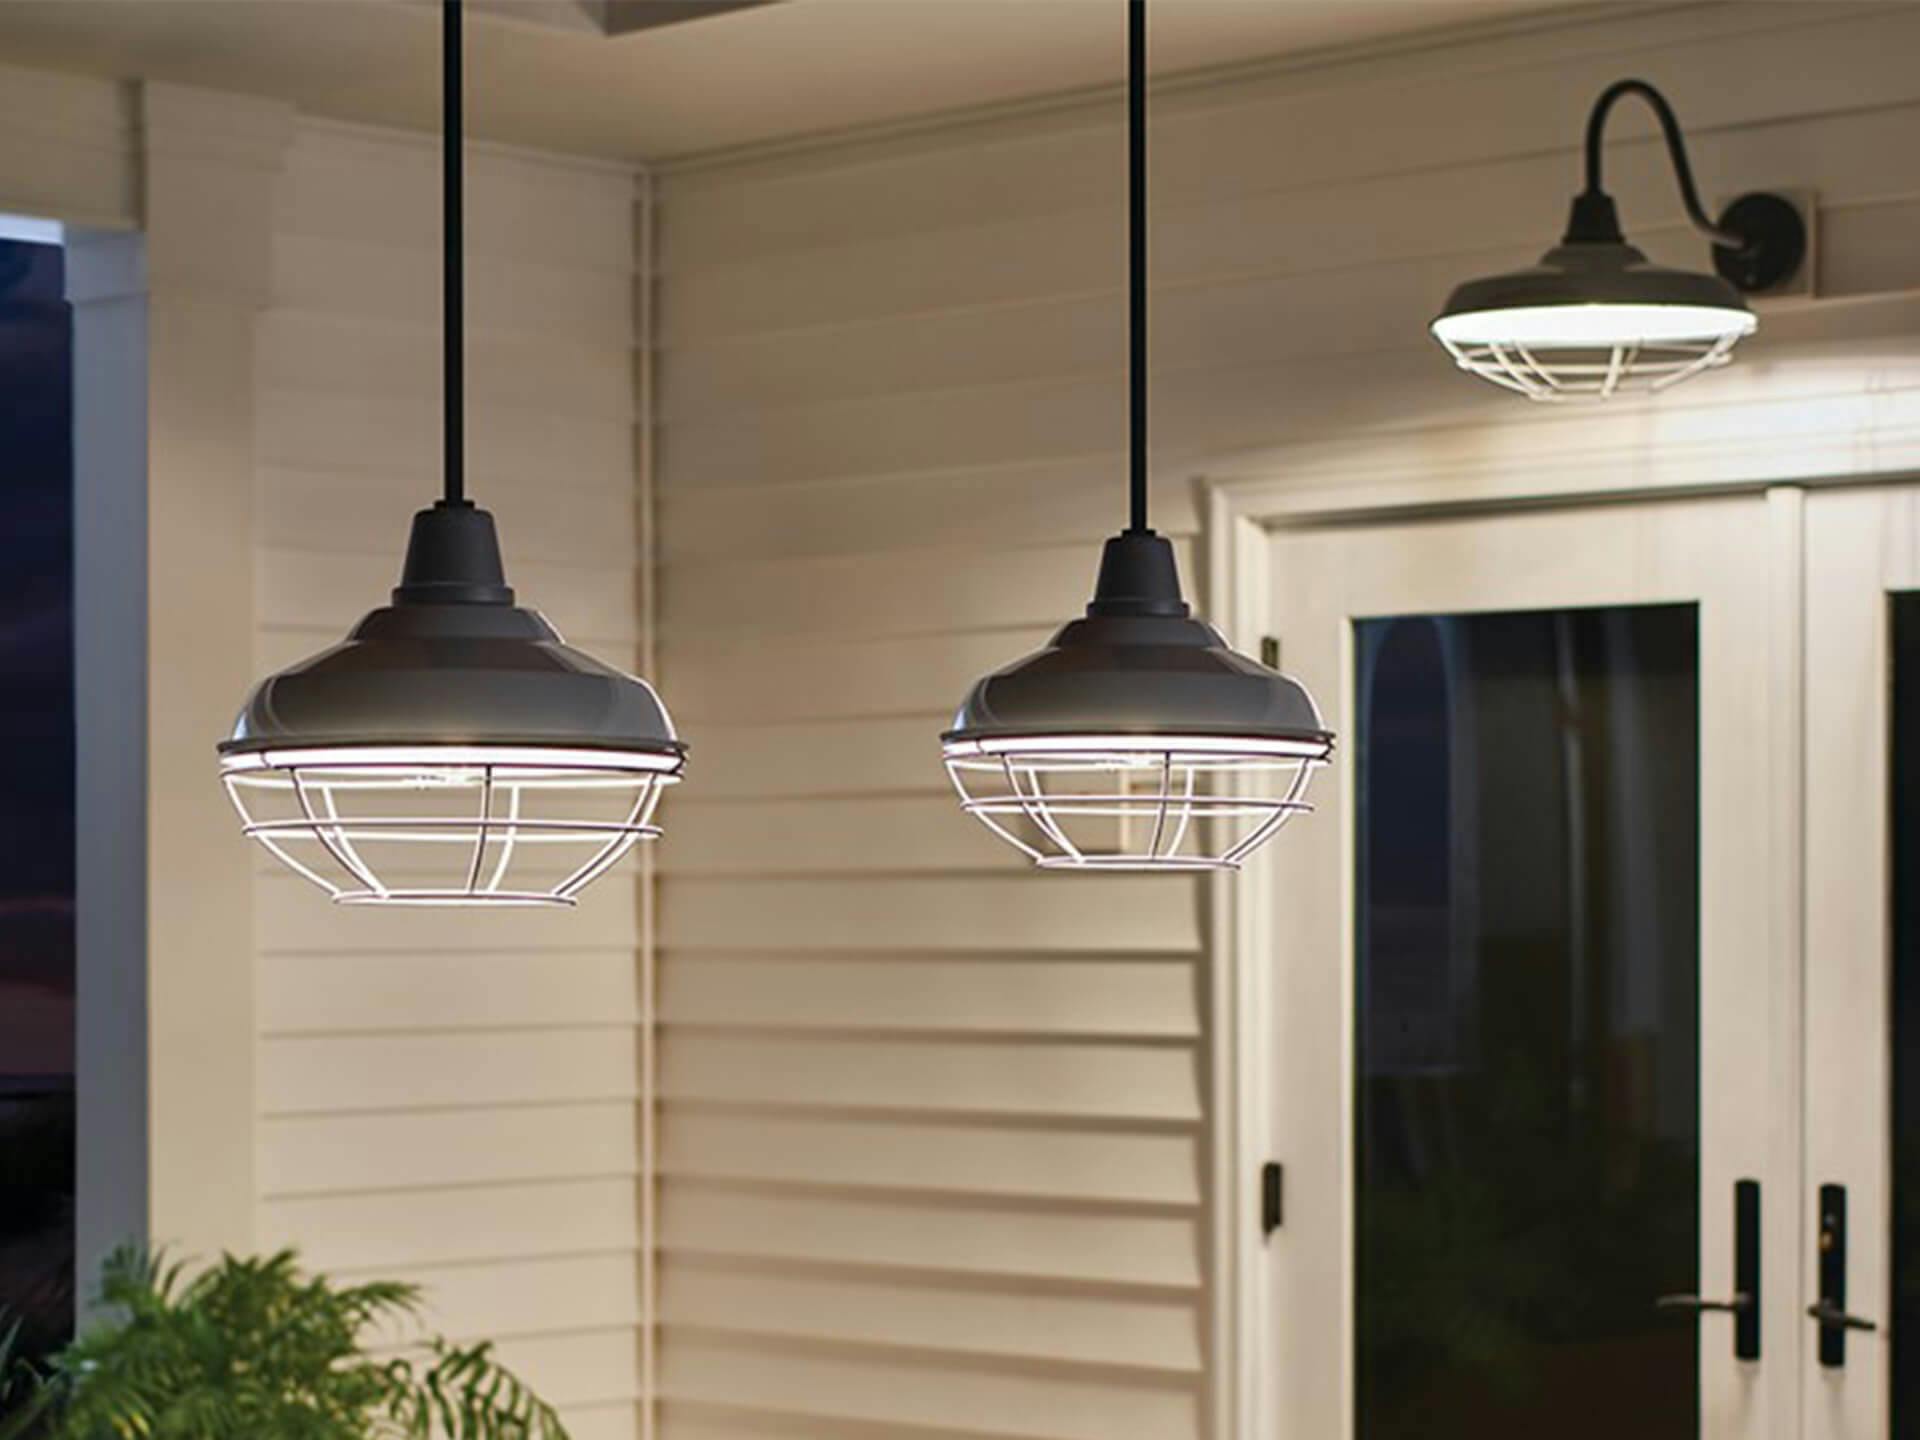 Porch at night with Pier pendant lights and sconce